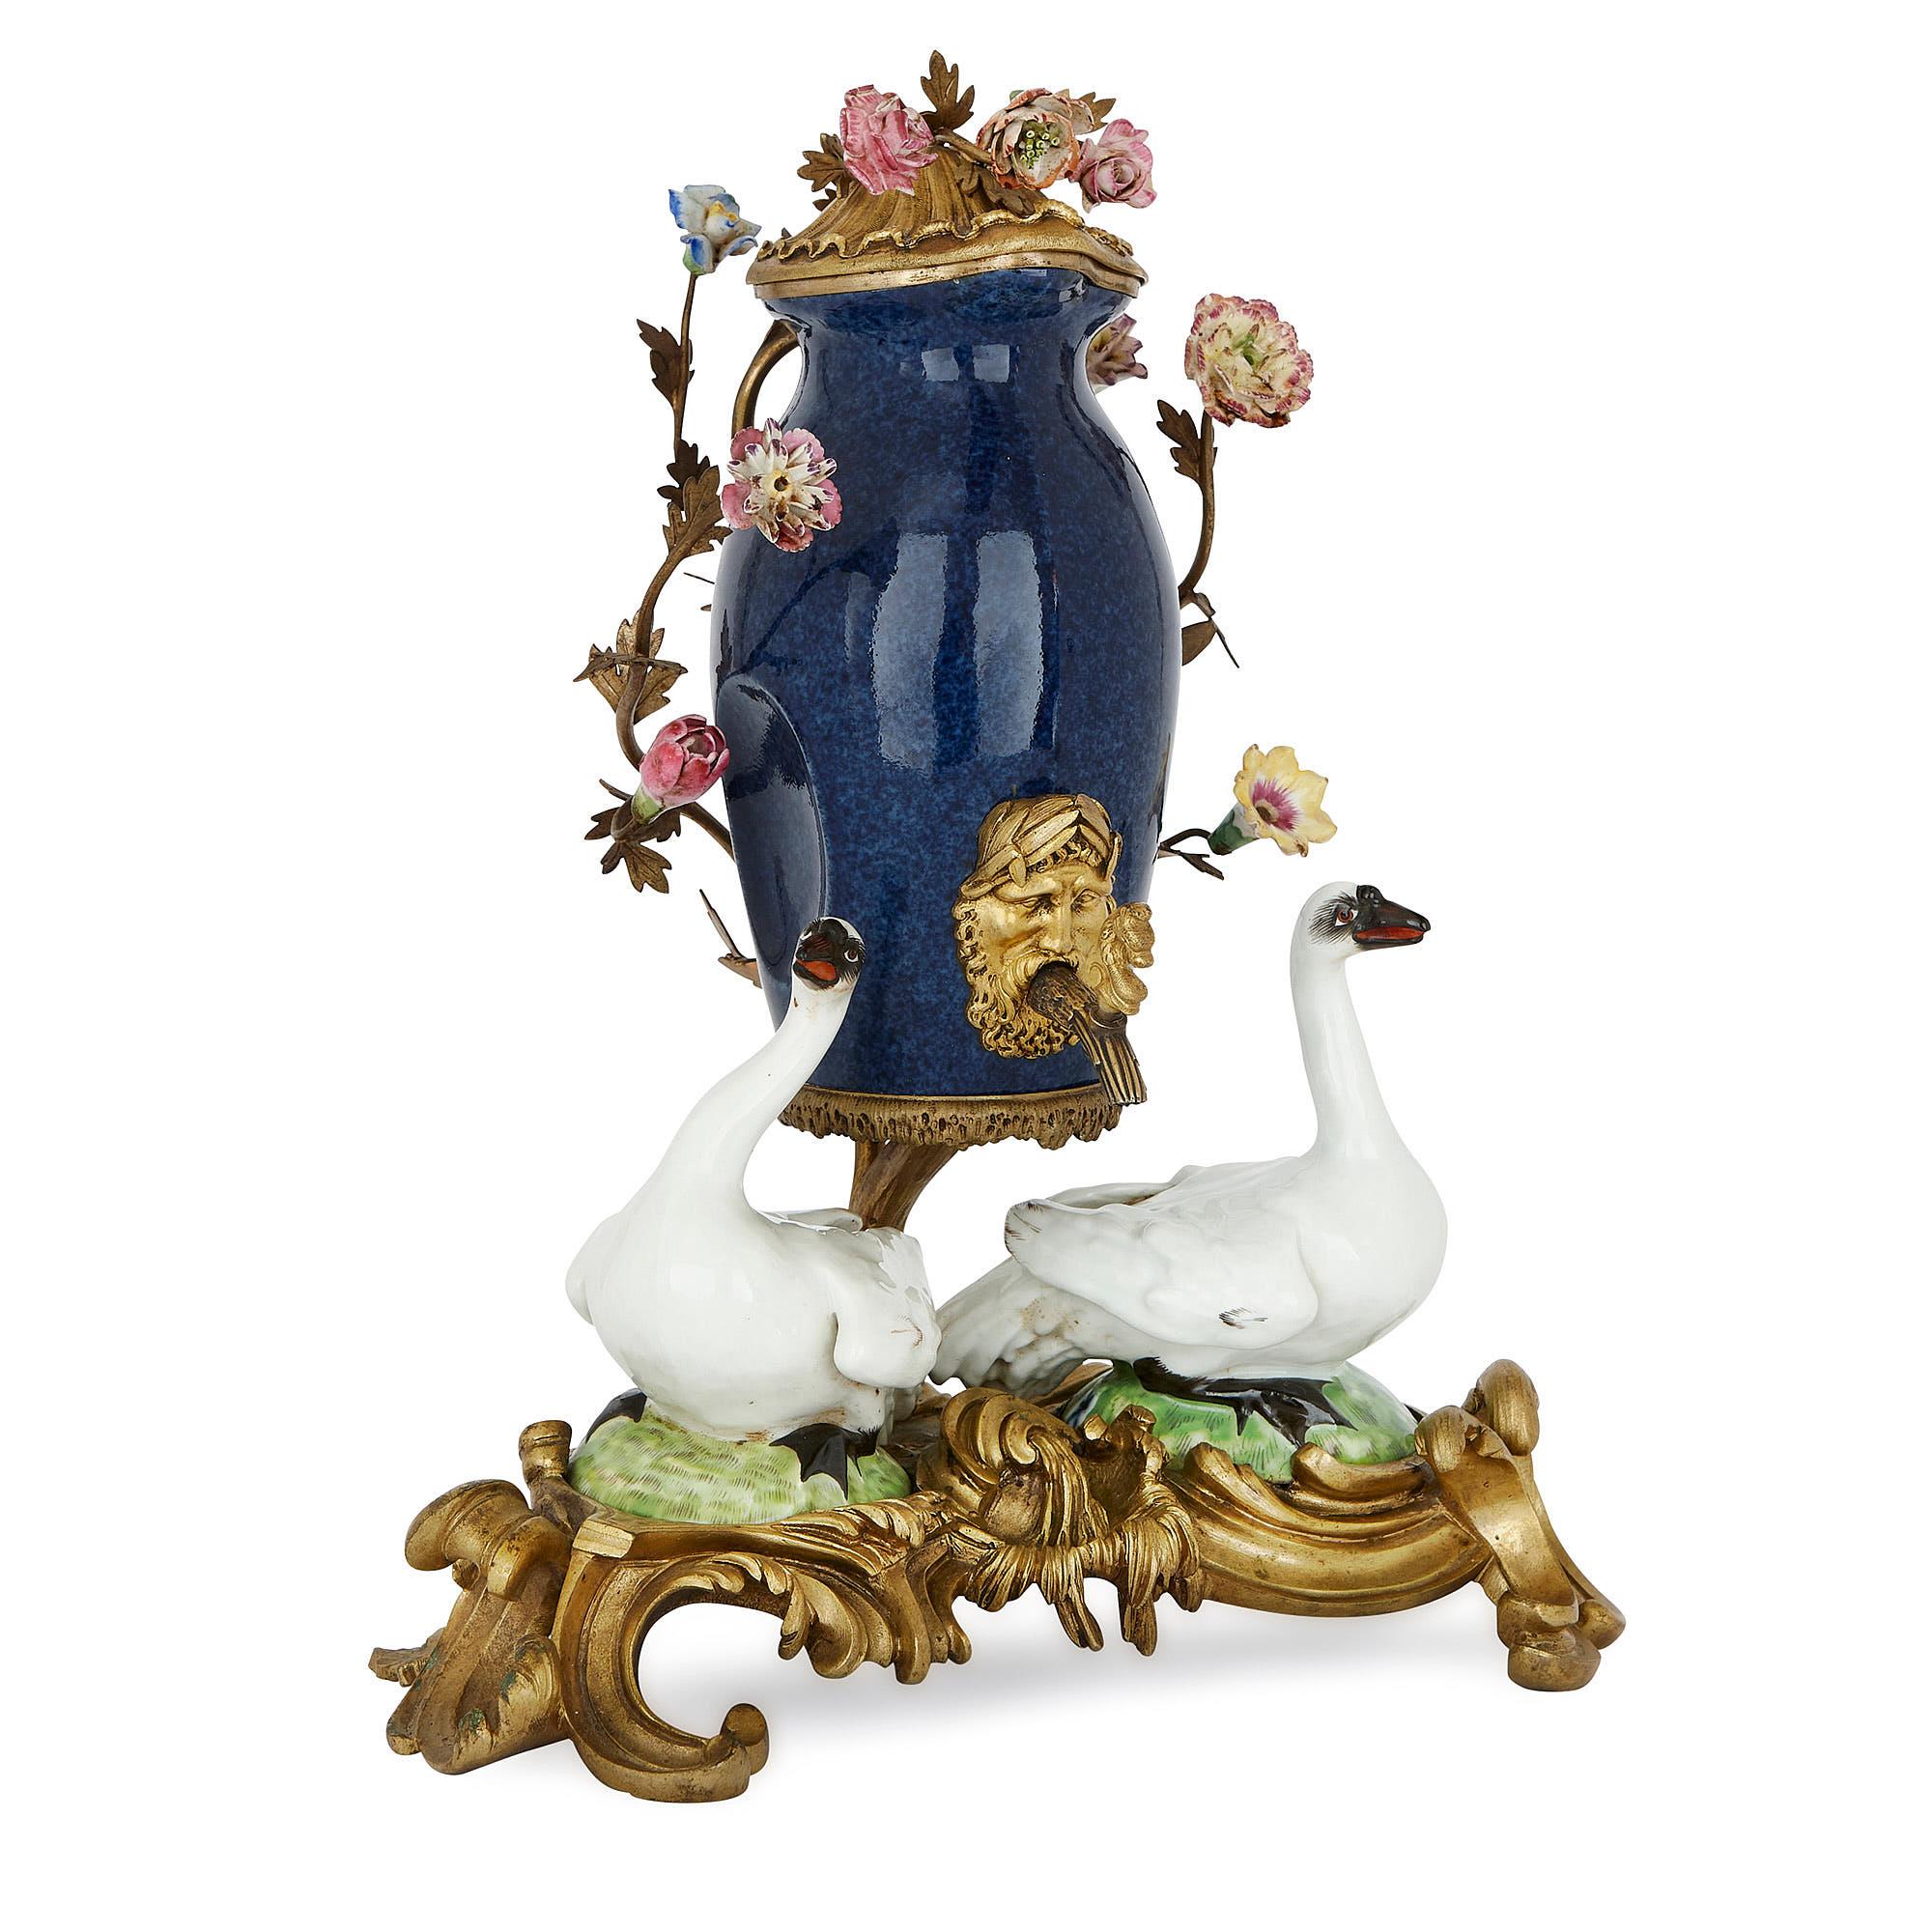 This colourful porcelain table fountain, fashioned in the German Meissen style, was crafted in the 19th Century by the French porcelain company Samson et Cie. 

The table fountain comprises of a central porcelain vase that is raised up in the air by